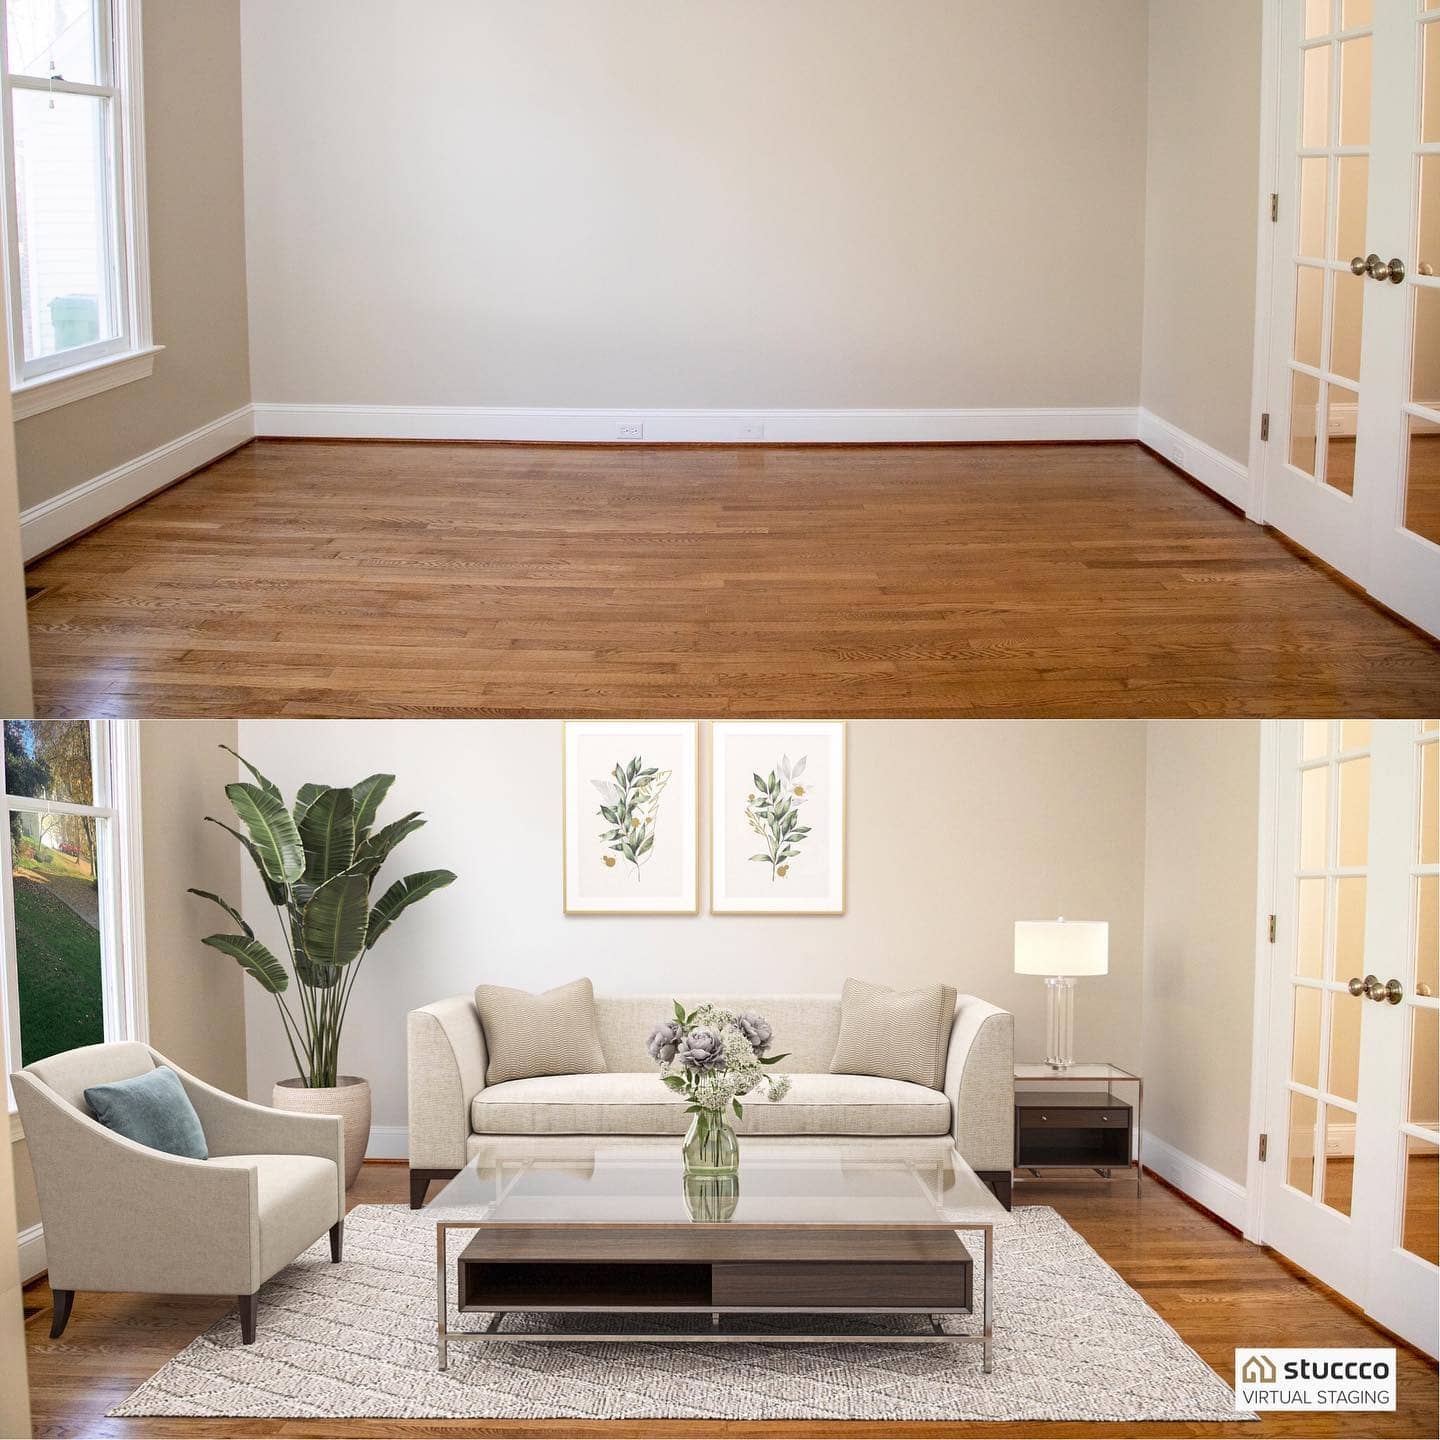 sell a house fast with stuccco virtual staging